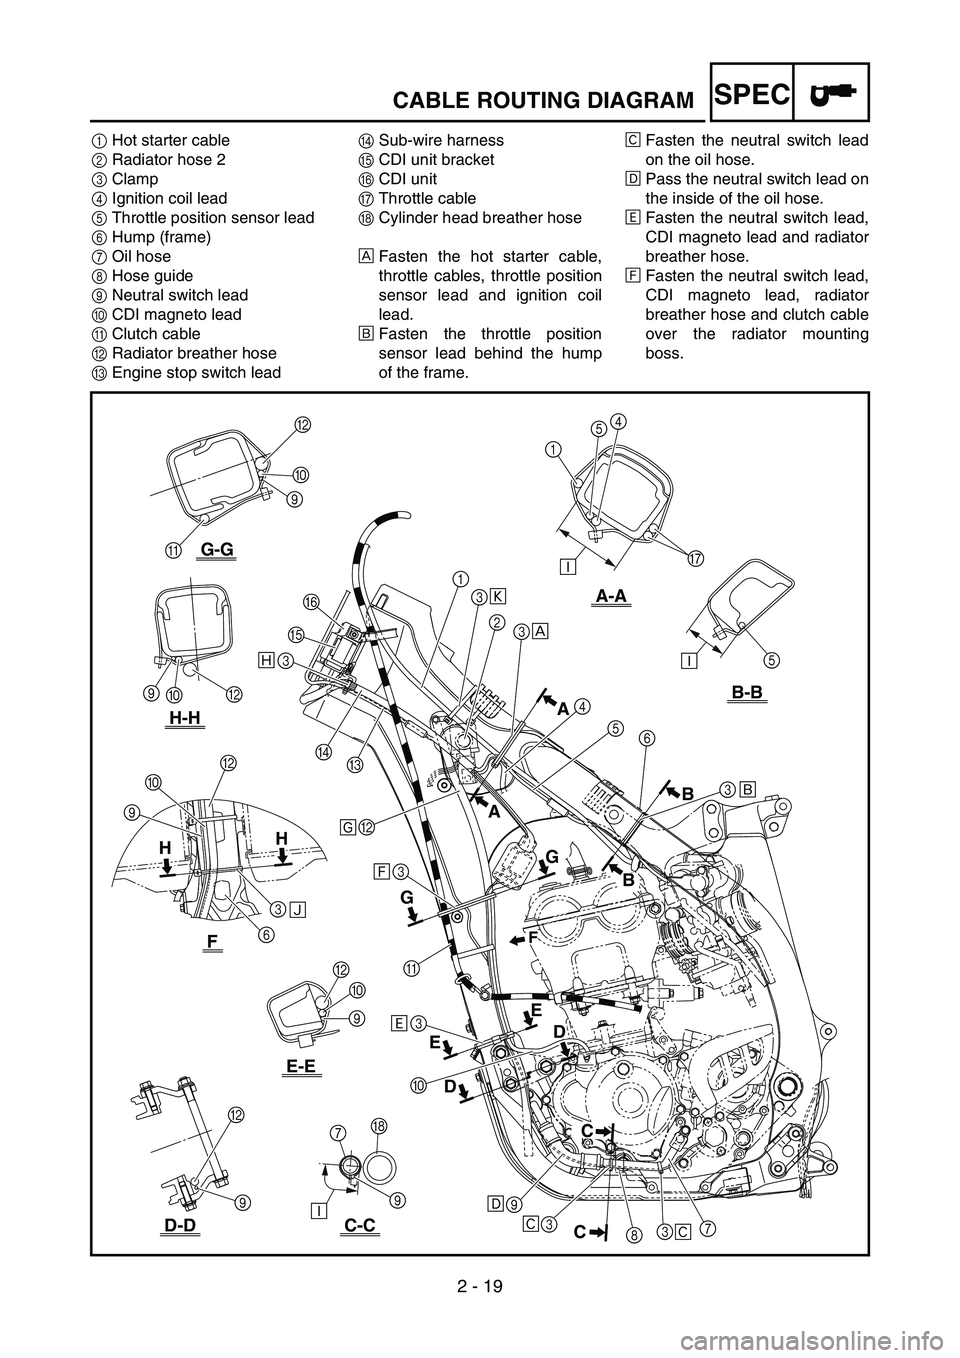 YAMAHA YZ250F 2006  Betriebsanleitungen (in German) 2 - 19
SPECCABLE ROUTING DIAGRAM
1Hot starter cable
2Radiator hose 2
3Clamp
4Ignition coil lead
5Throttle position sensor lead
6Hump (frame)
7Oil hose
8Hose guide
9Neutral switch lead
0CDI magneto lea